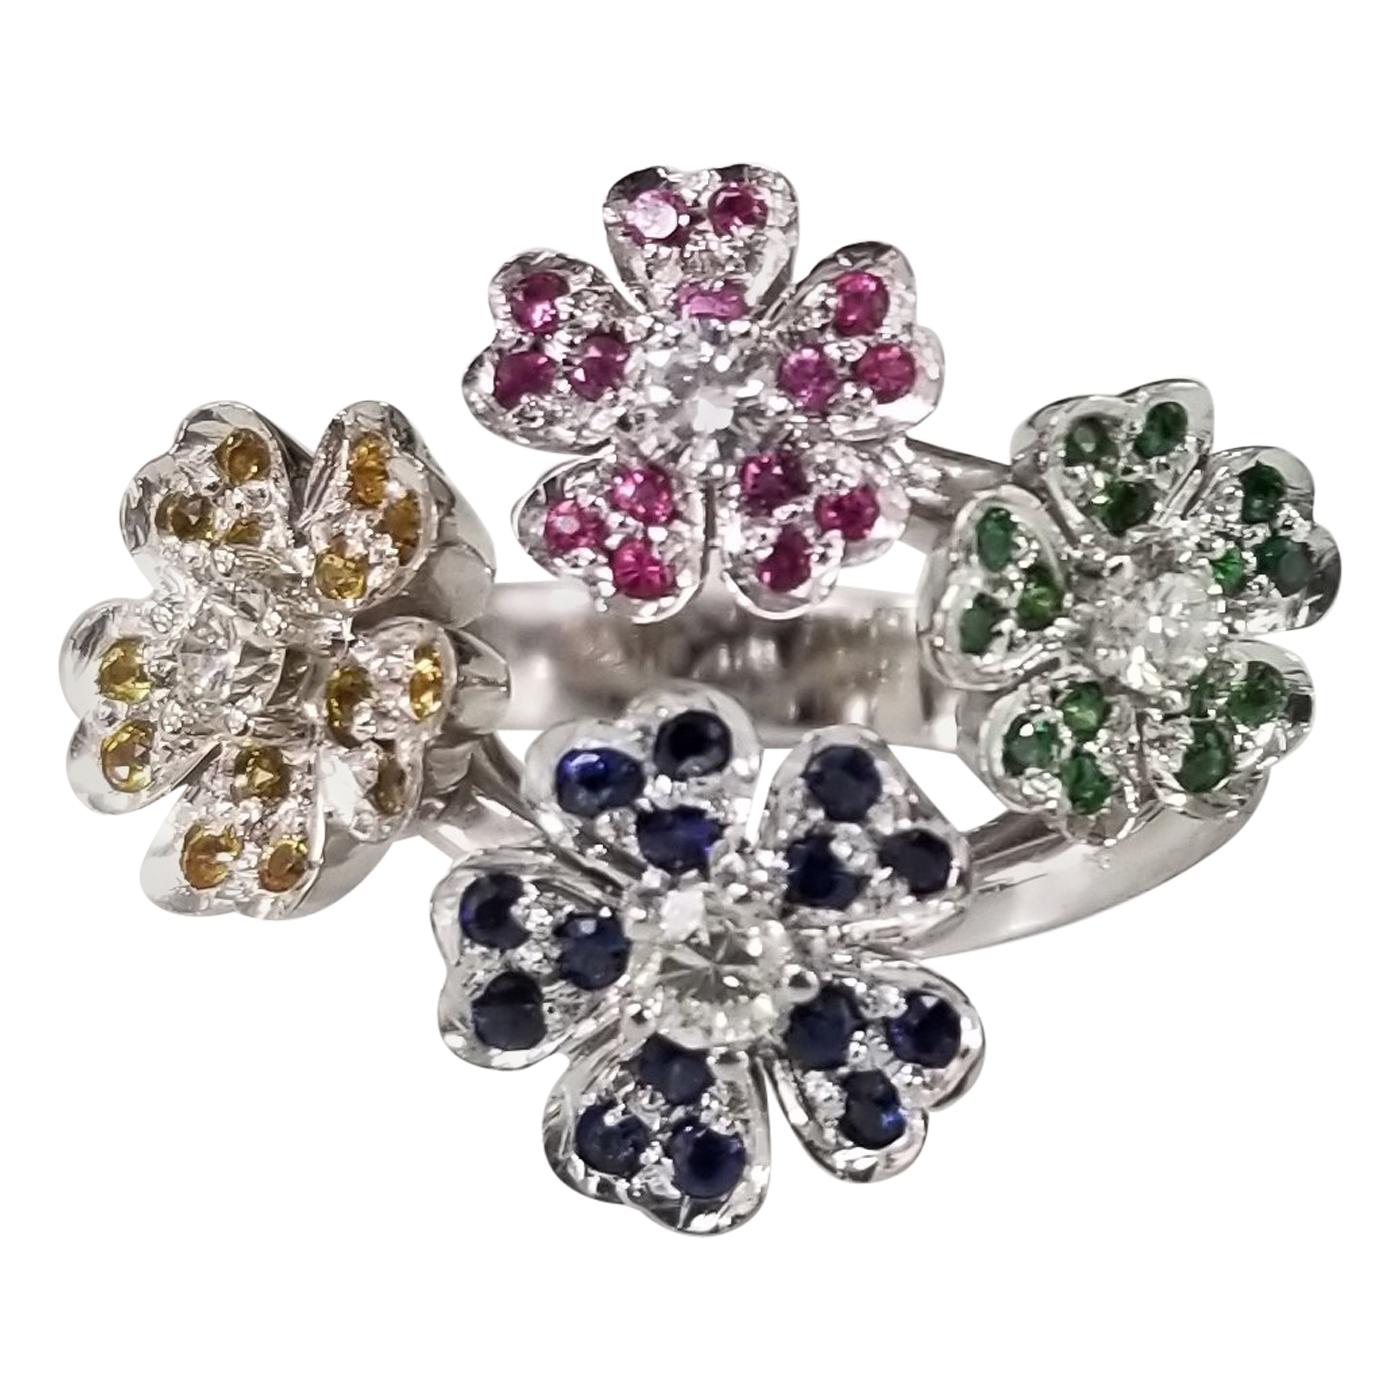 14 Karat White Gold "Bouquet" of Colored Stones Flowers Ring